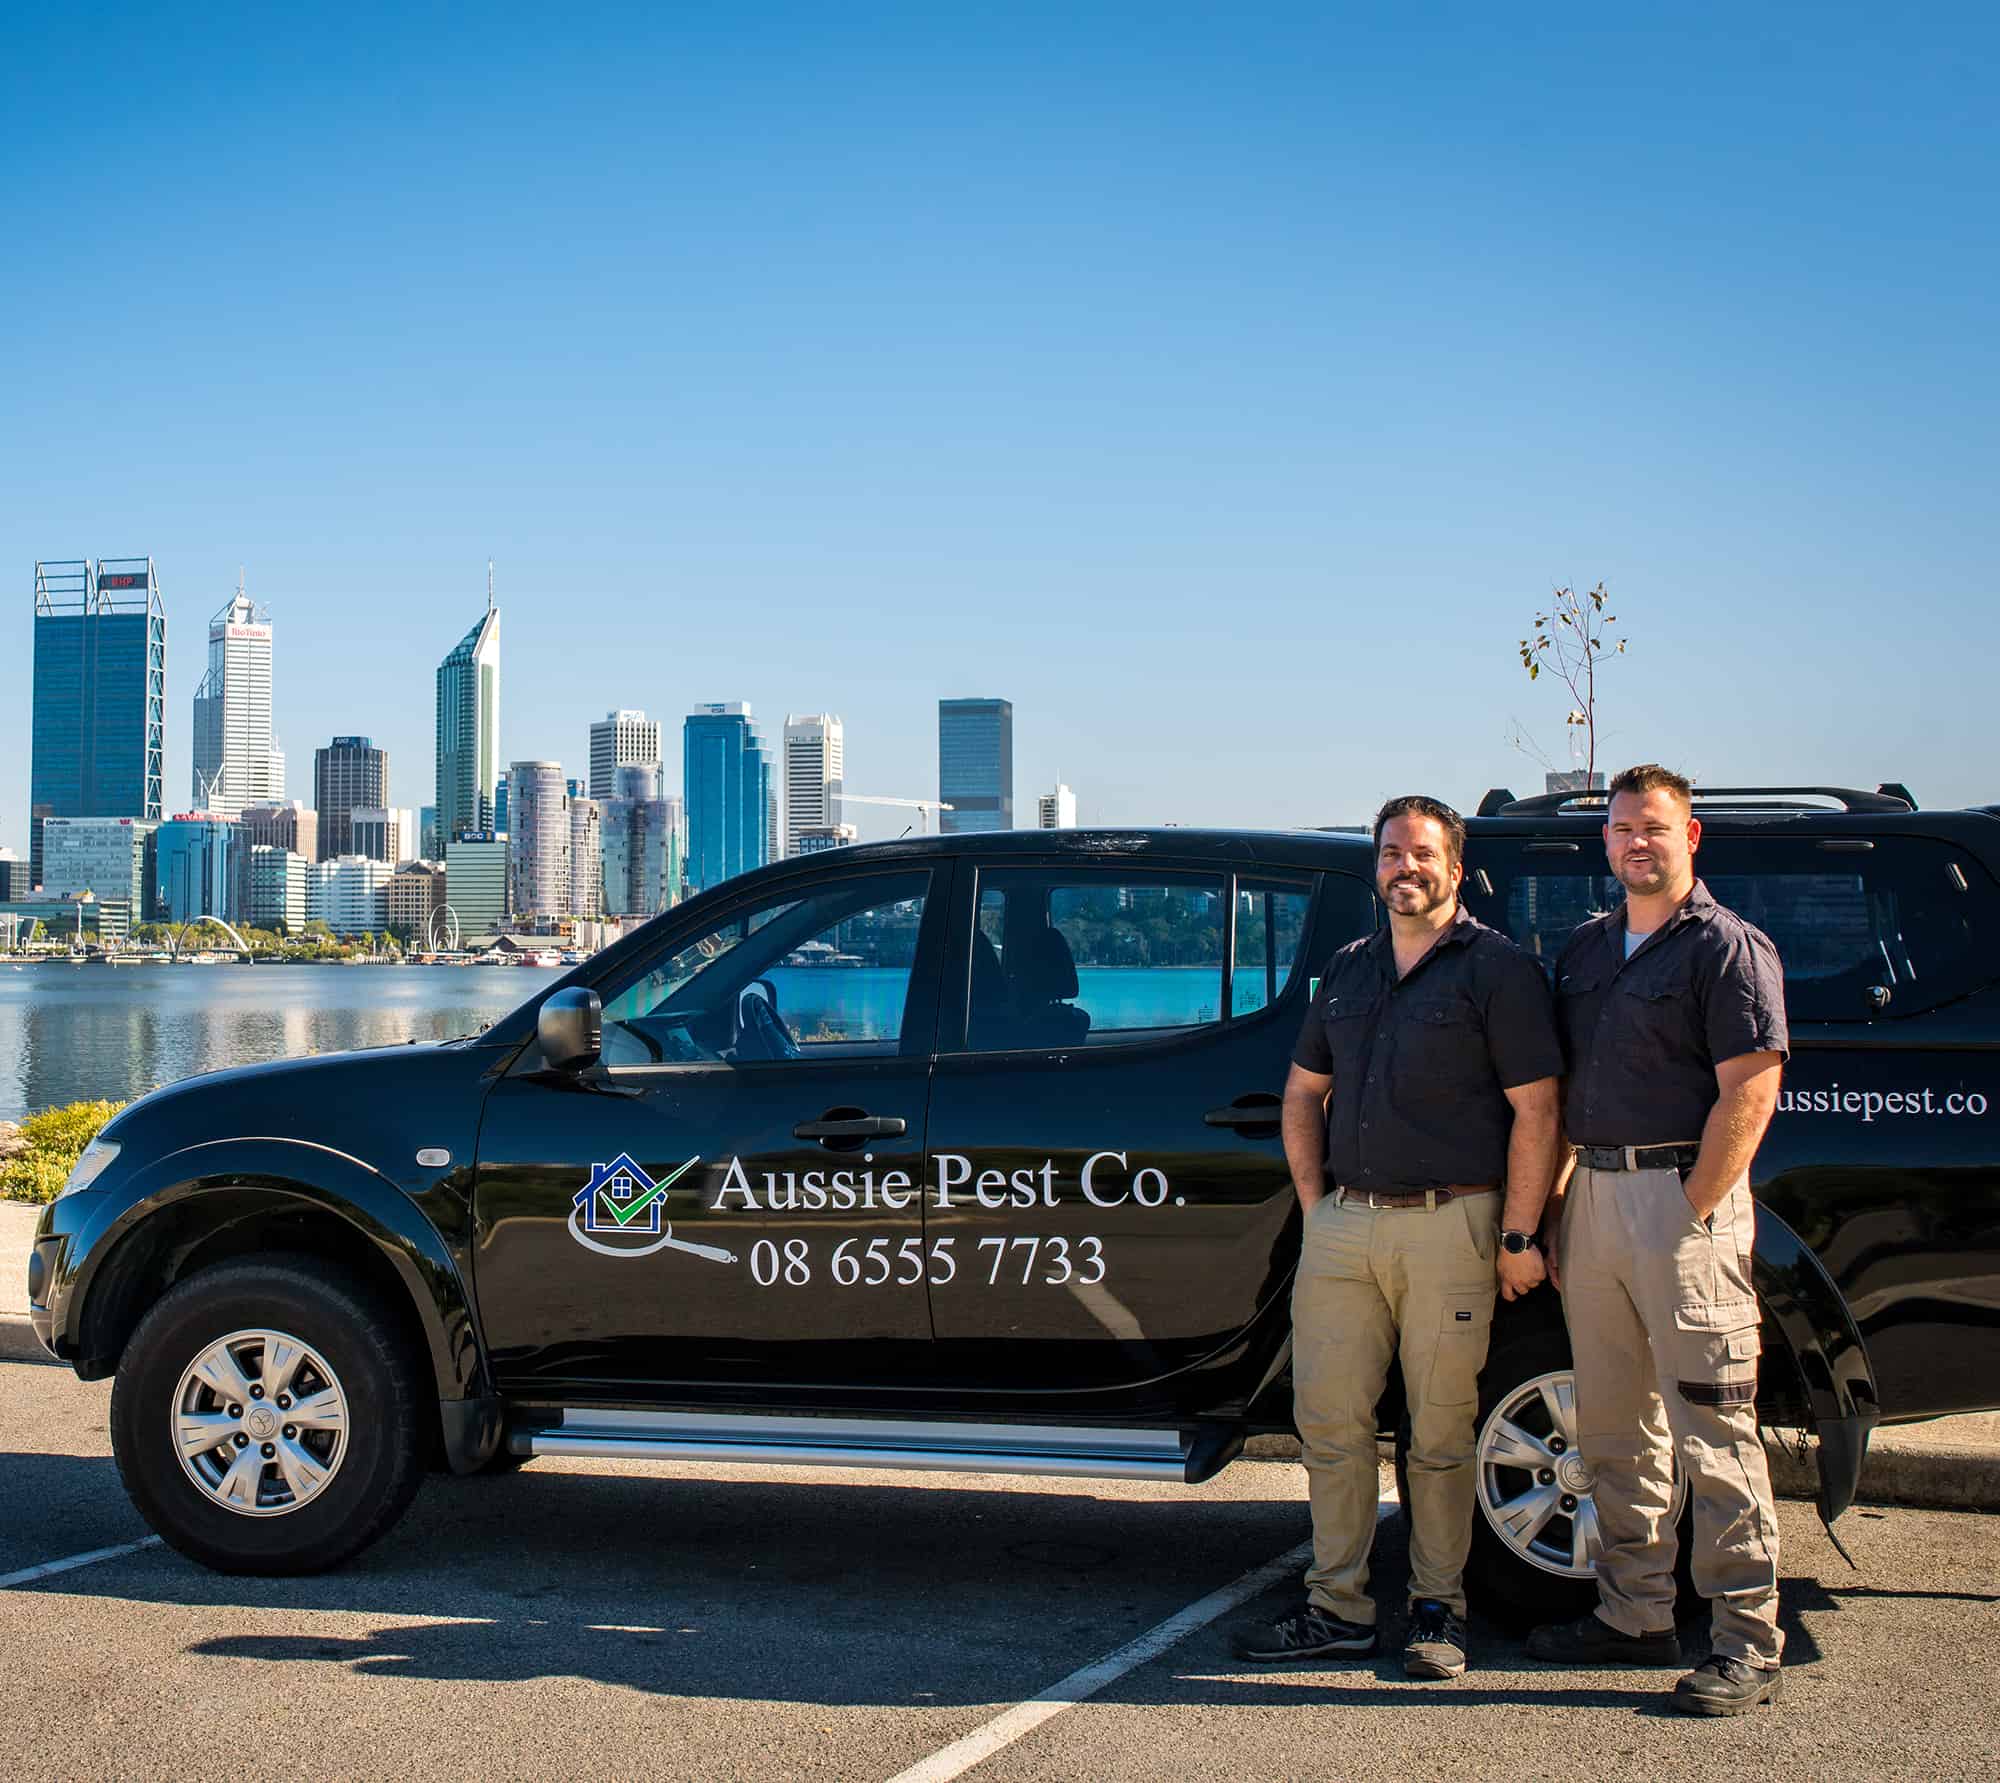 The team at Aussie Pest Co offering Pest Control Services in Perth, Western Australia.